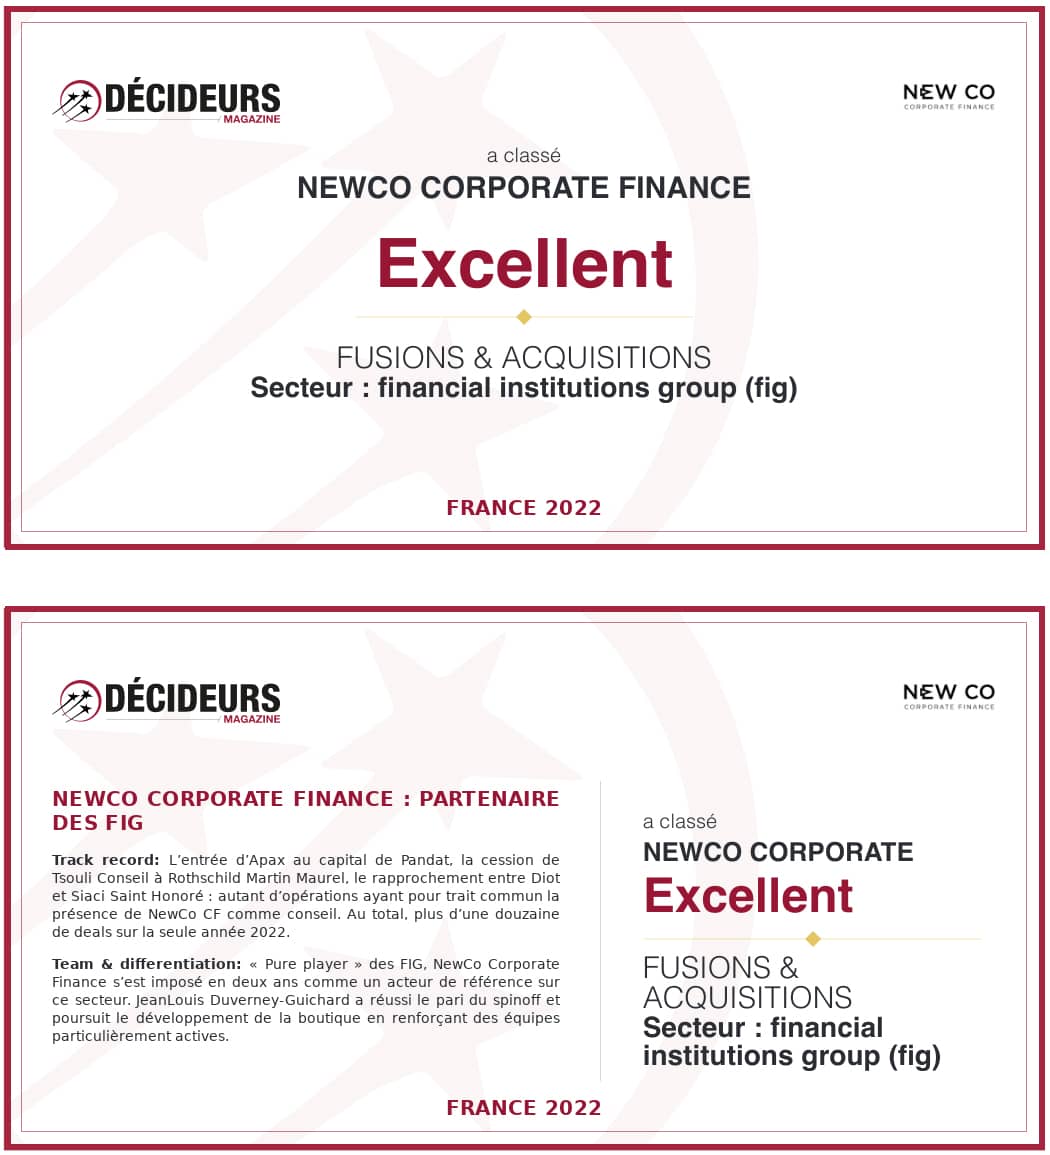 Two years after its inception, NewCo Corporate Finance is again ranked “Excellent” in the Leaders League ranking